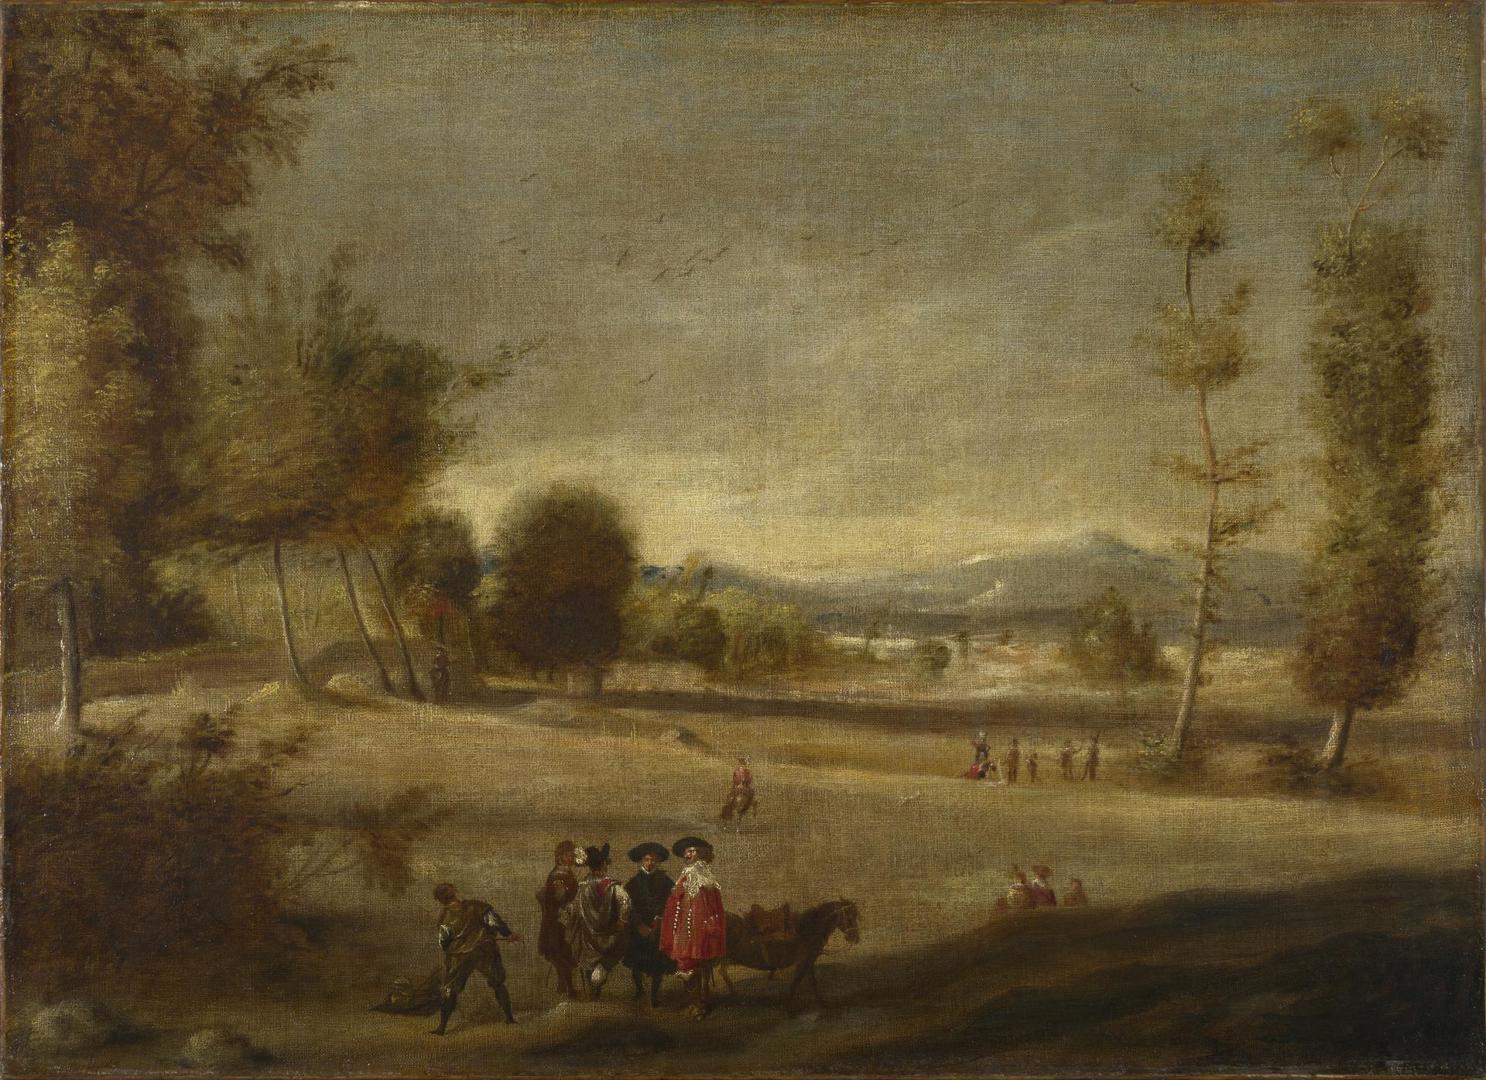 Landscape with Figures by Spanish